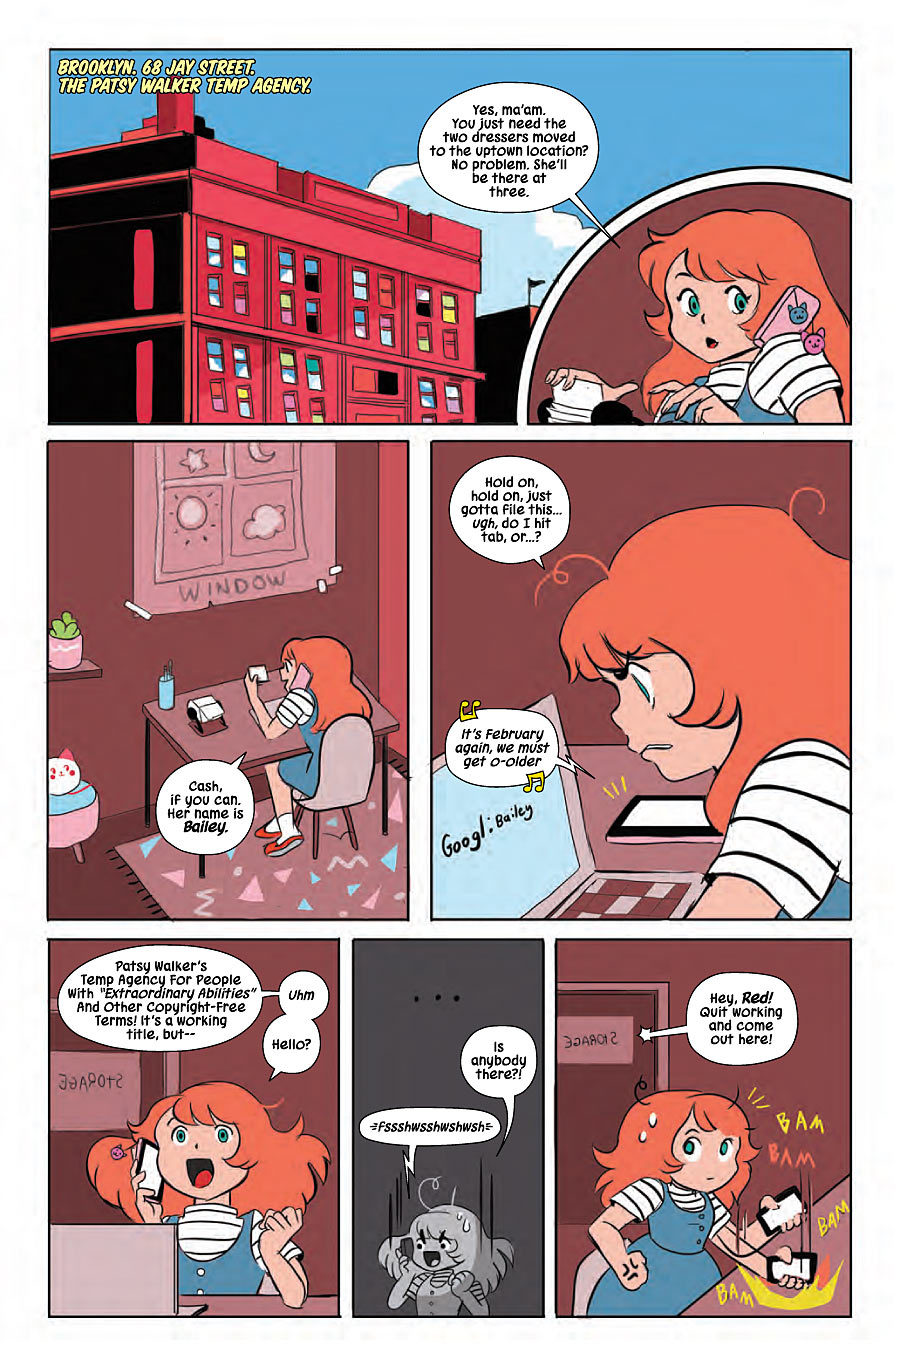 kateordie:  PATSY WALKER AKA HELLCAT #6 is out TODAY, with art by Bee and Puppycat/Fionna